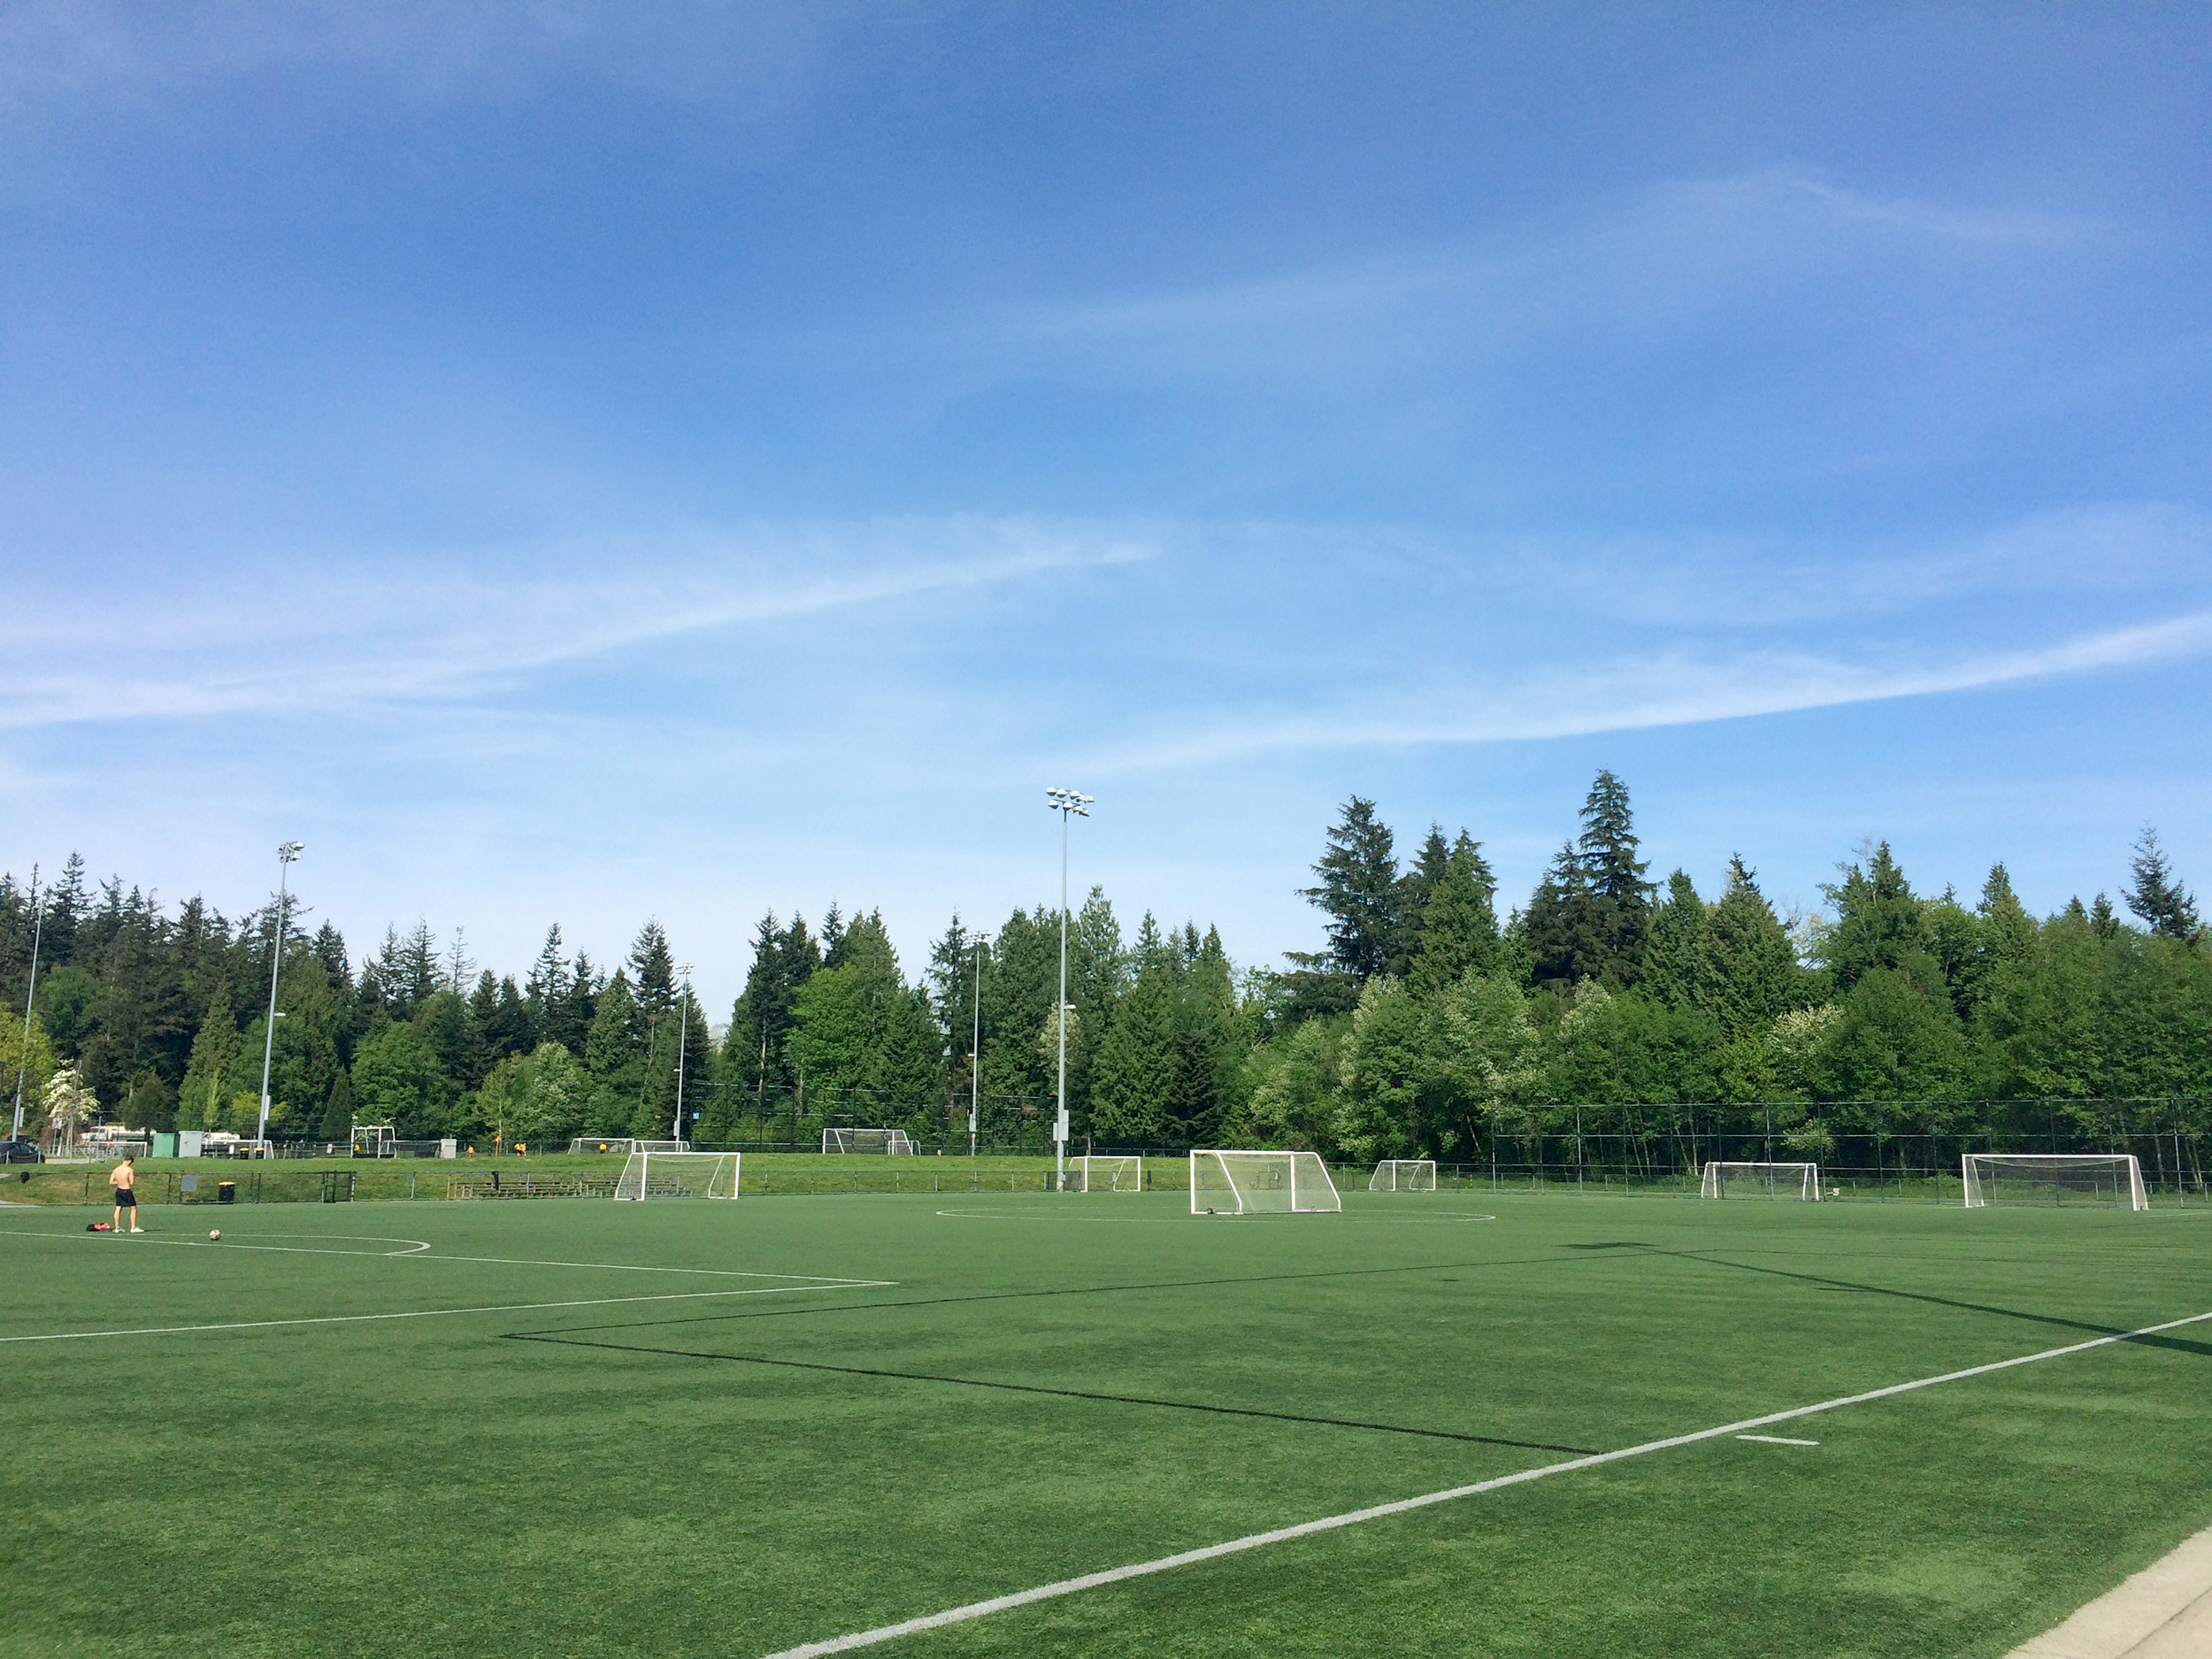 South Surrey Athletic Park Soccer Field on a Sunny Day